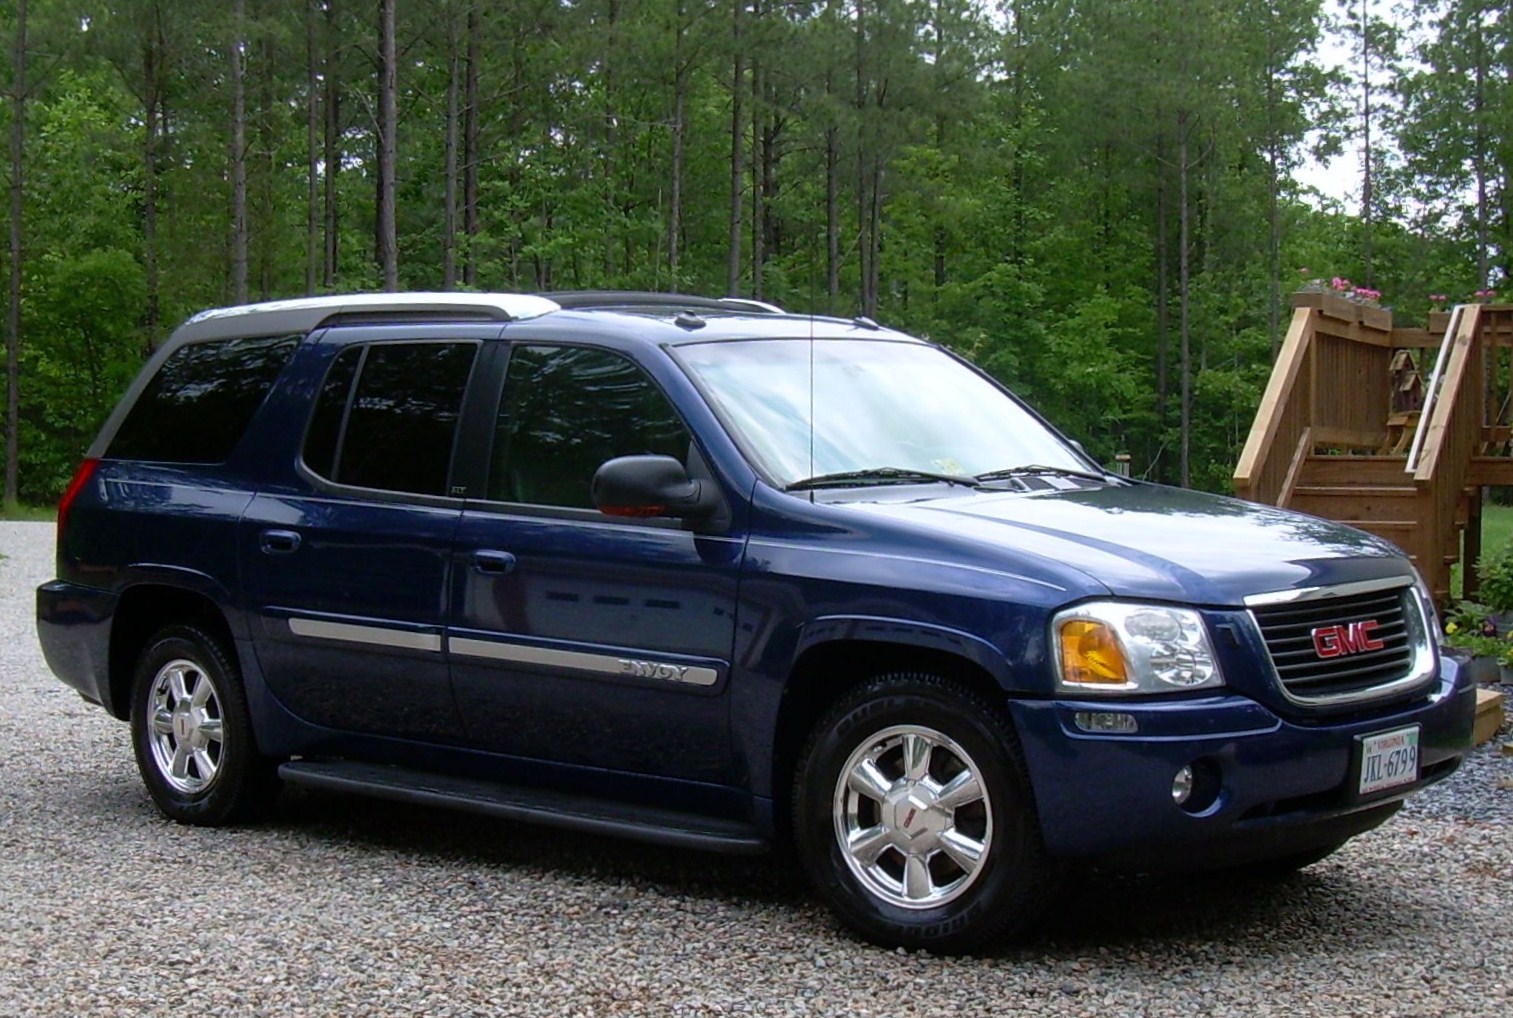 2004 GMC Envoy XUV - Information and photos - Neo Drive